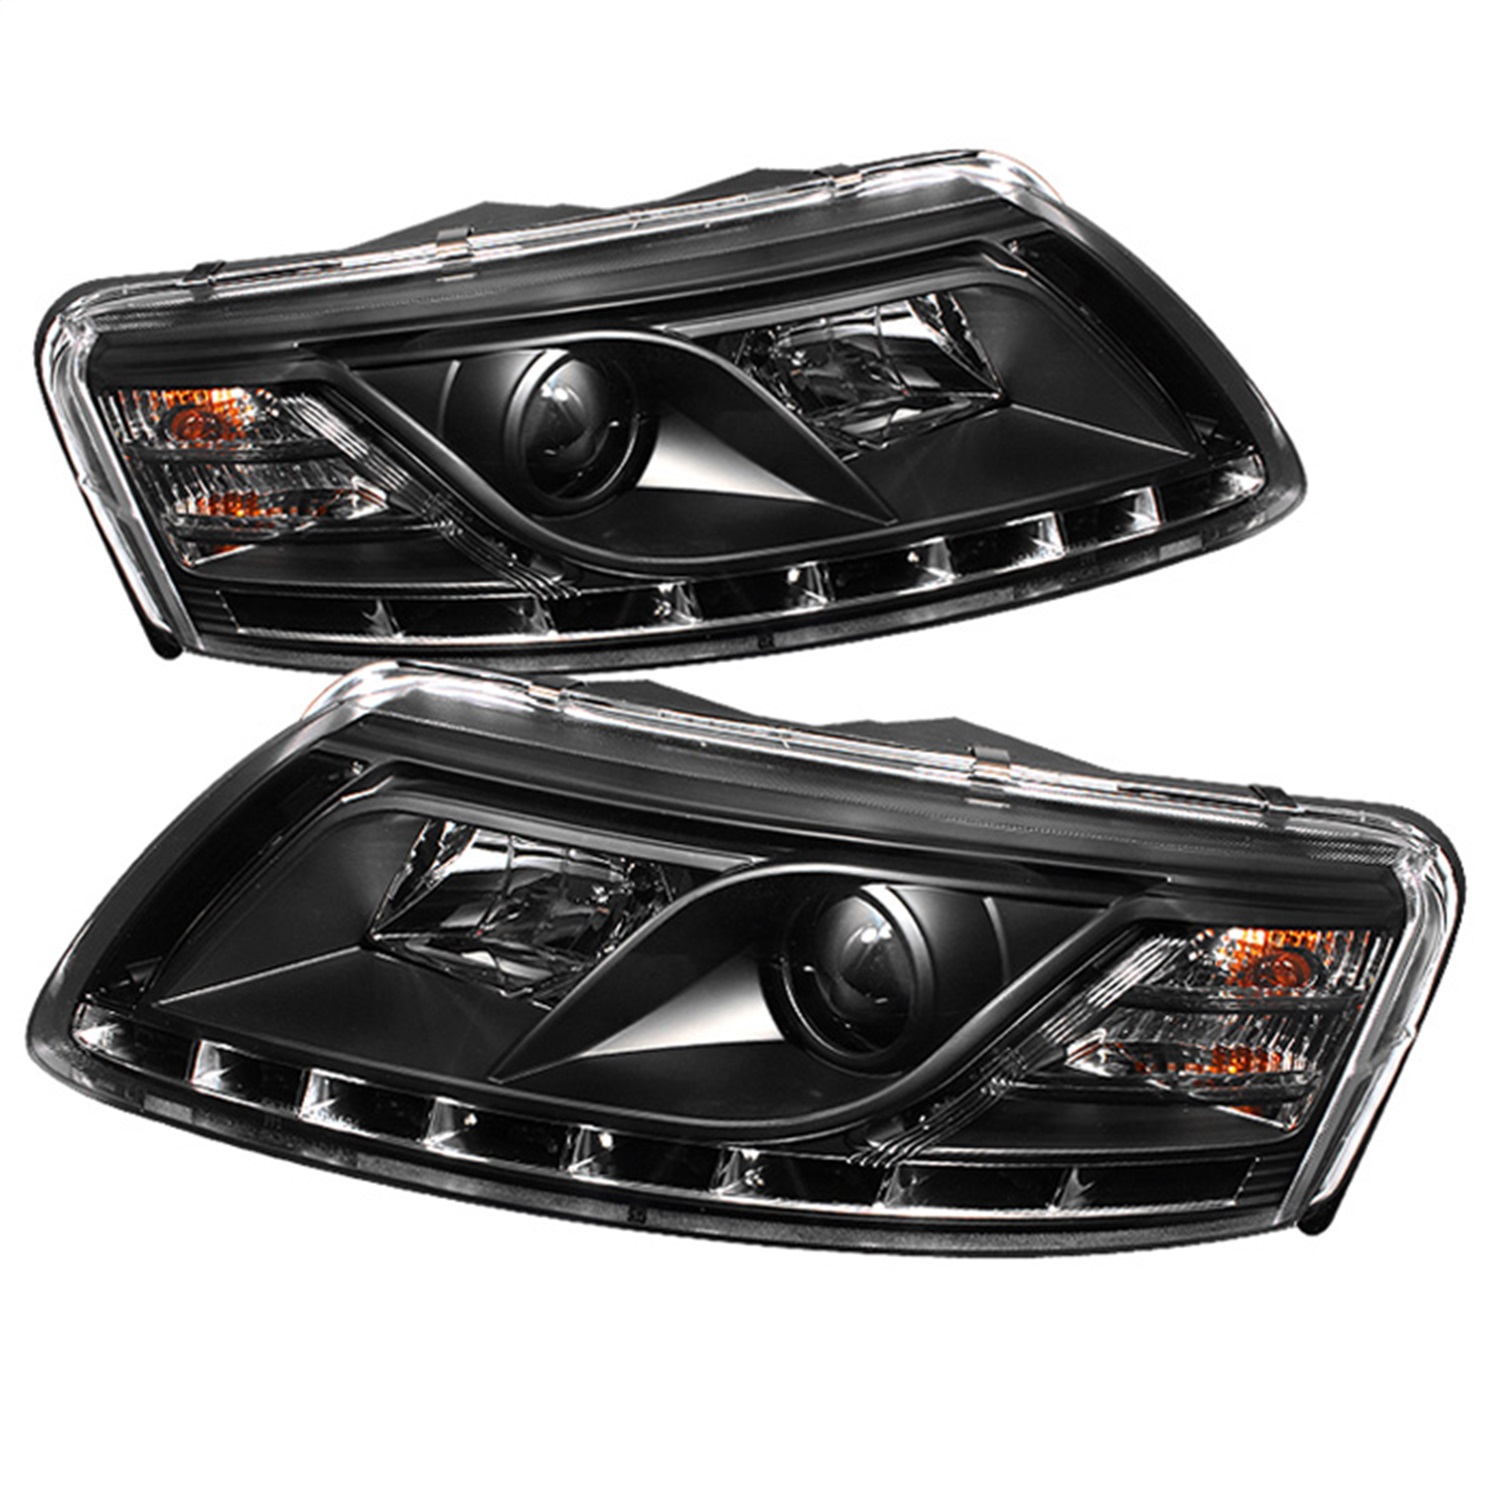 Spyder Auto 5029416 DRL LED Projector Headlights Fits 05-07 A6 A6 Quattro